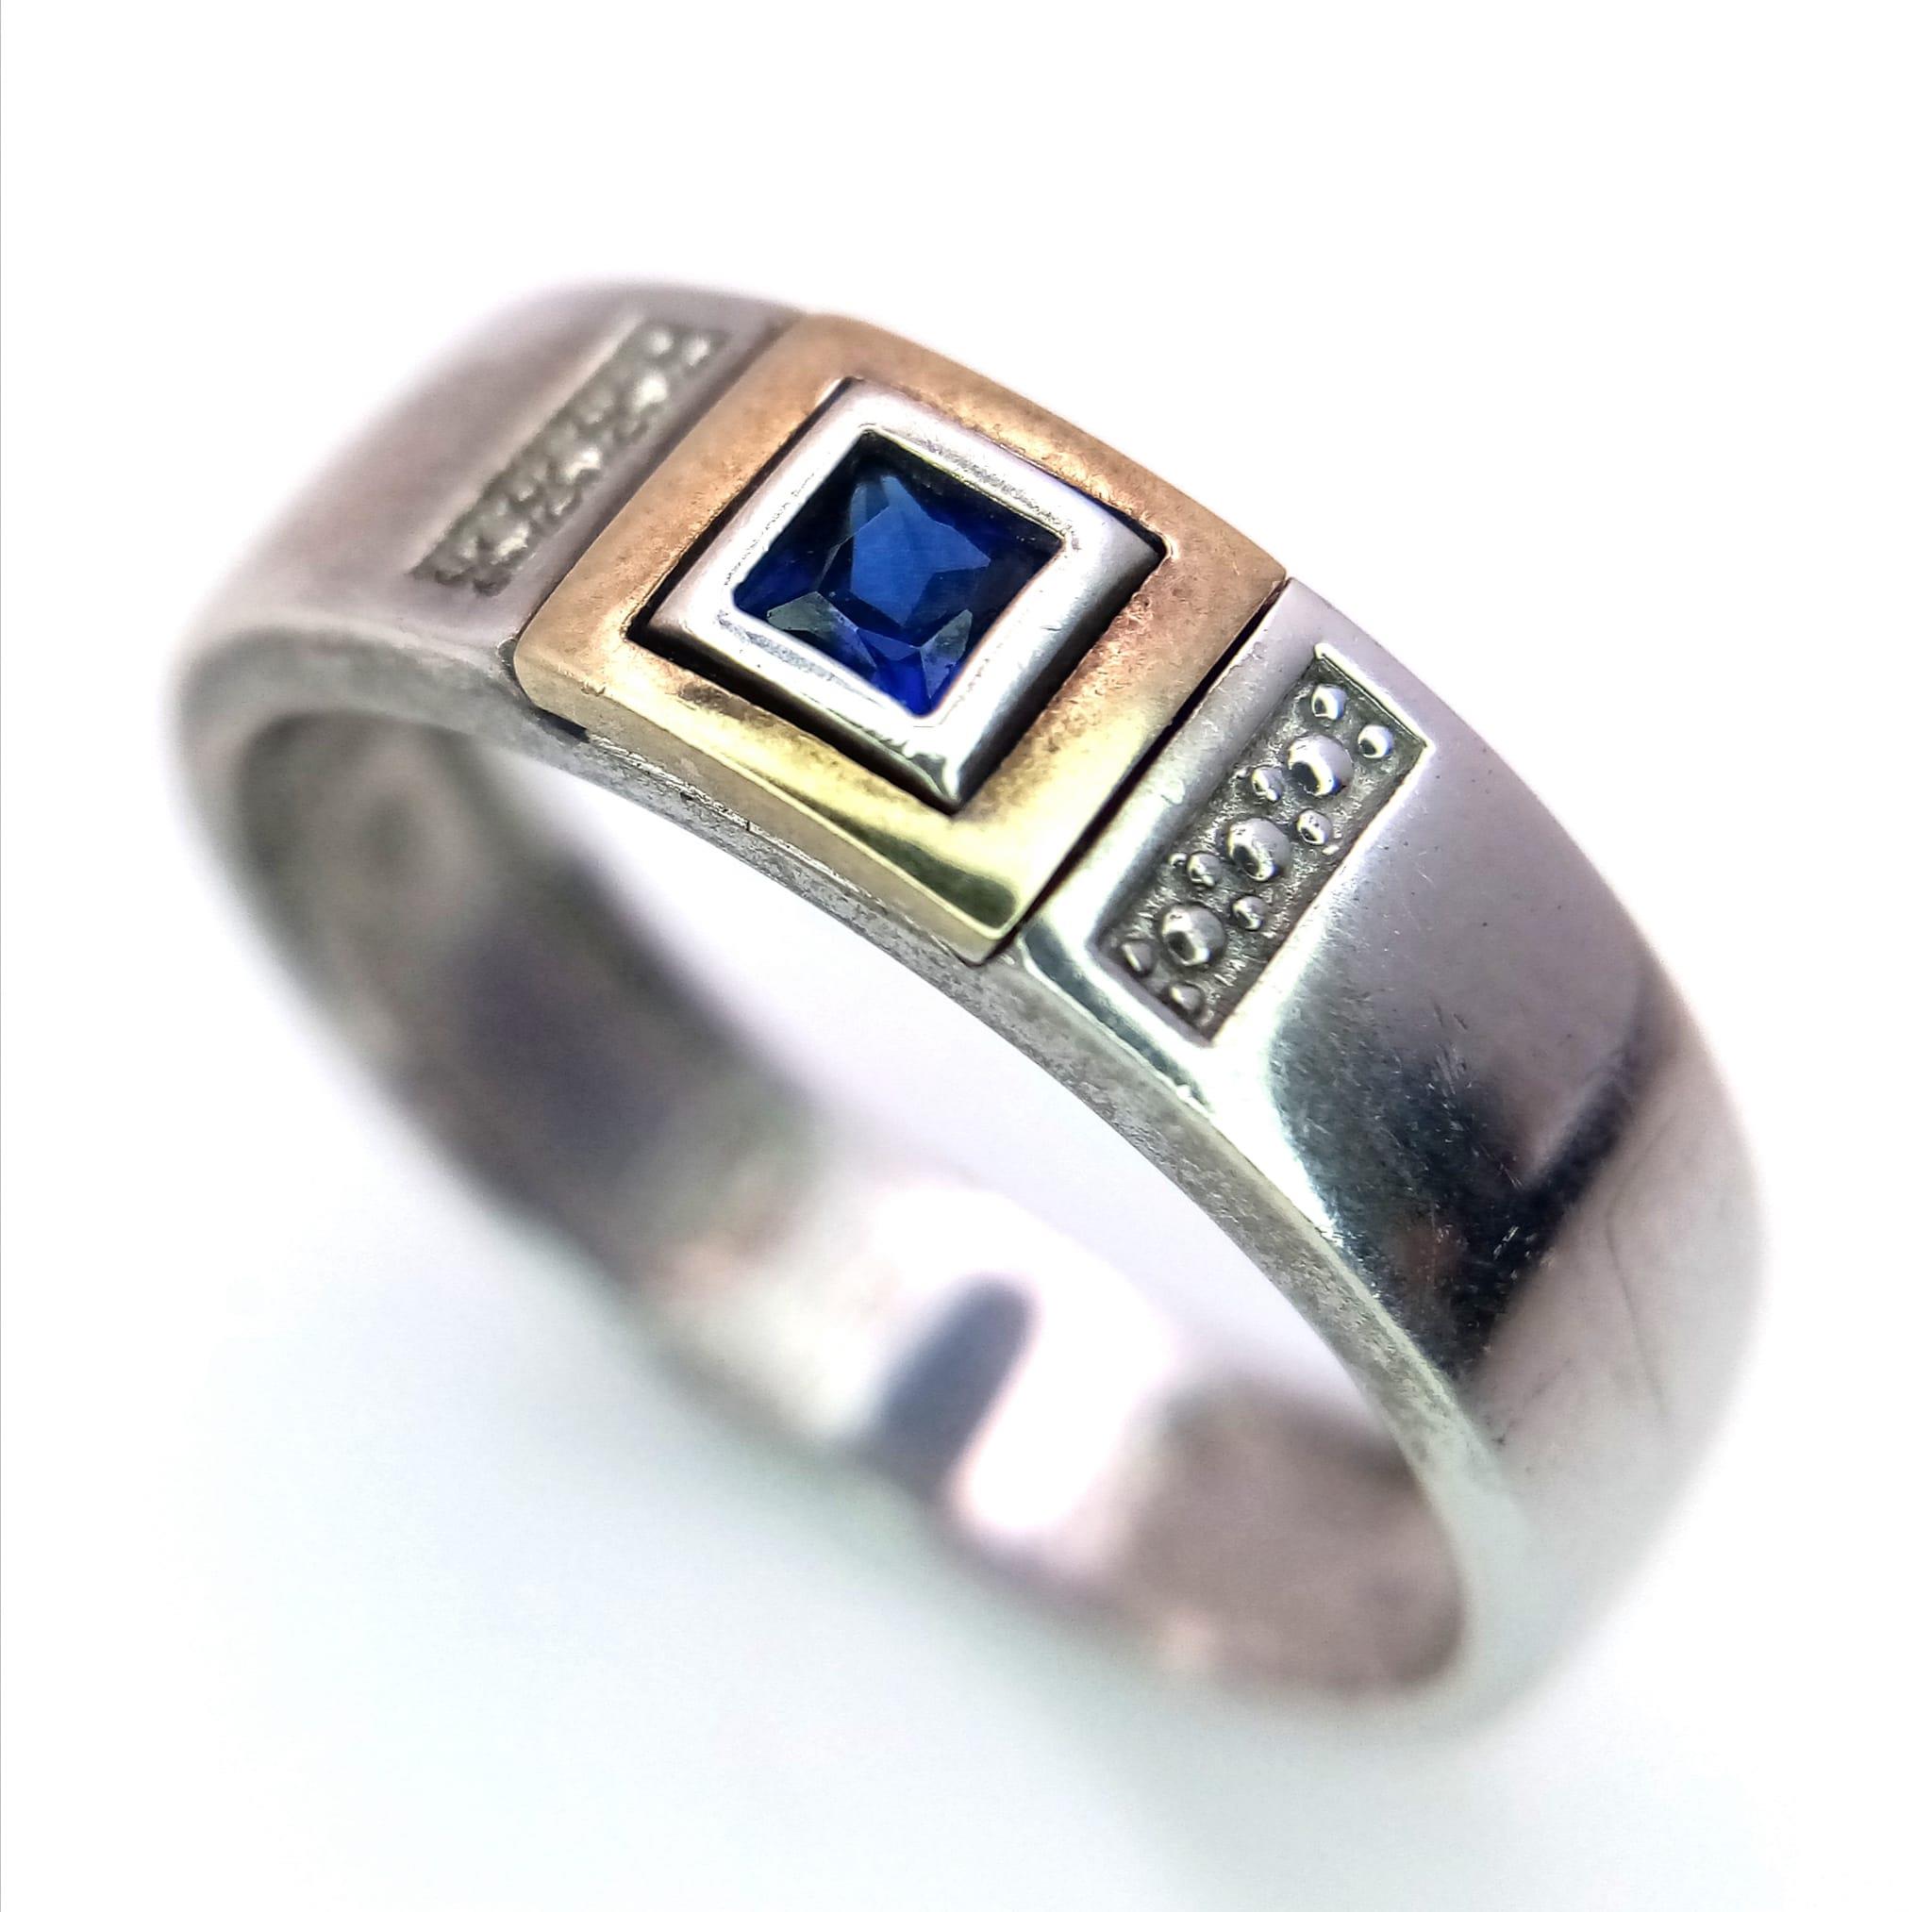 A 925 Silver Blue Stone Gents Ring. Size U.